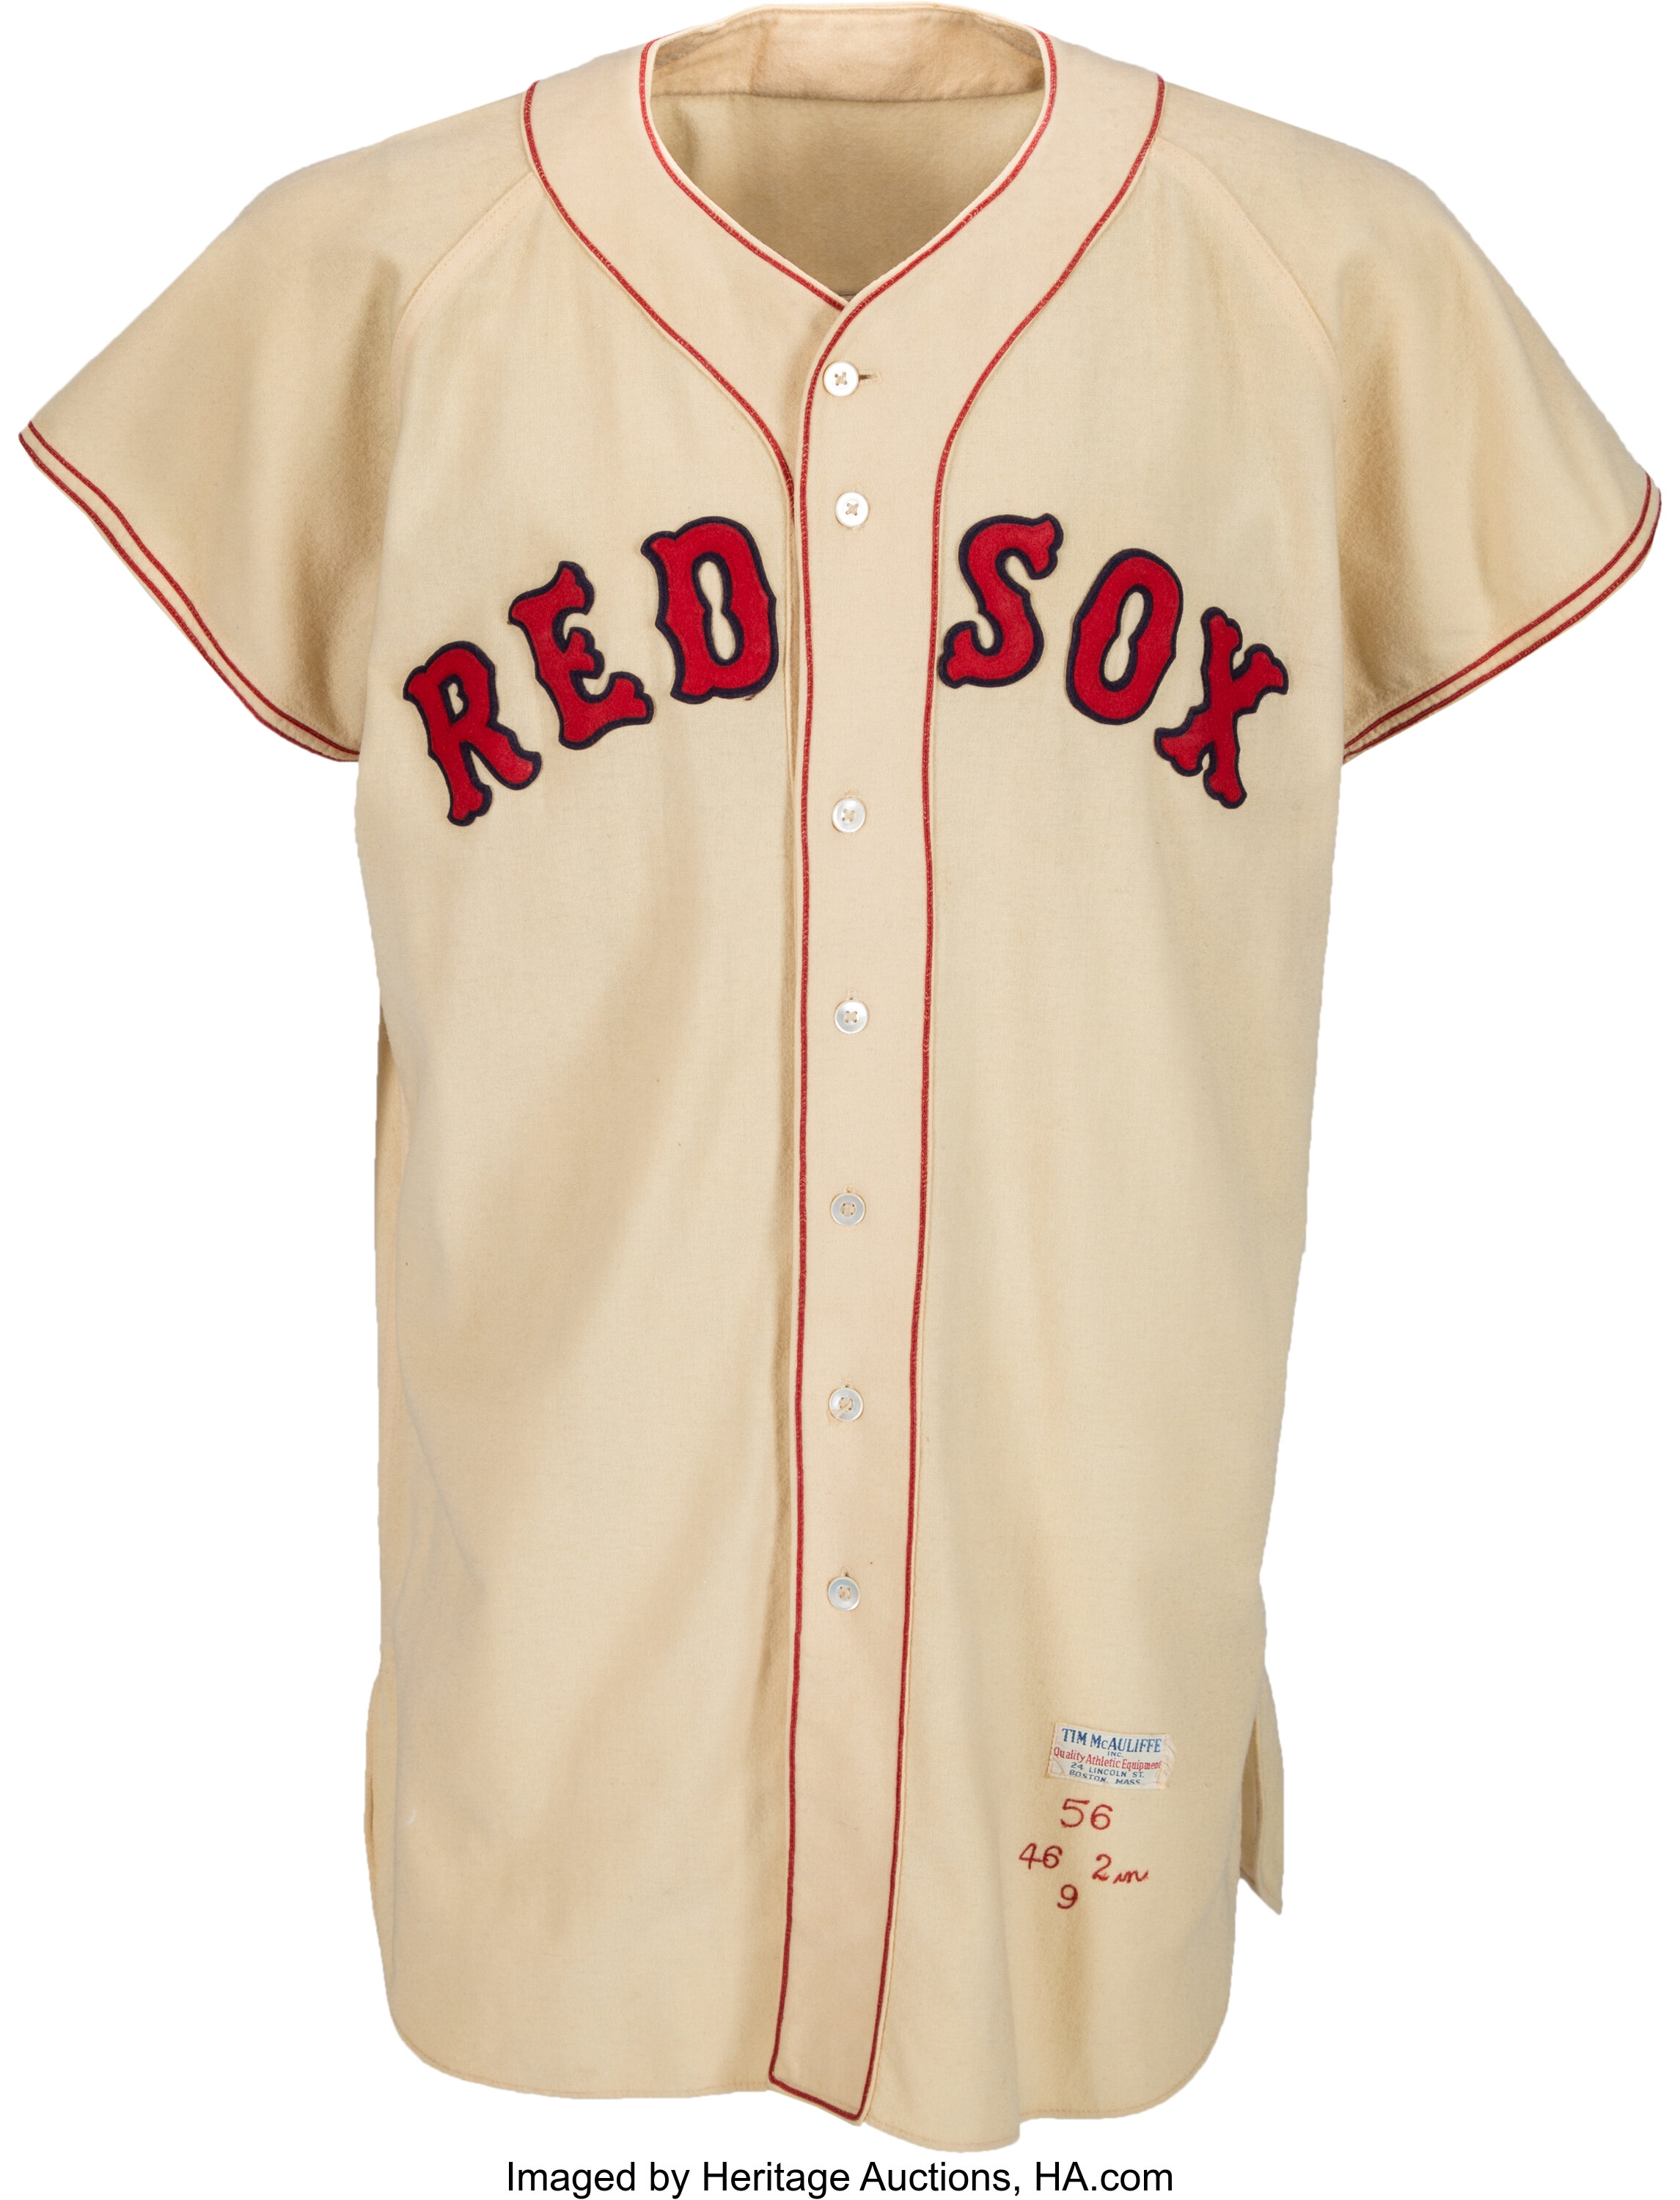 1951 Ted Williams Game Worn Boston Red Sox Jersey. Baseball